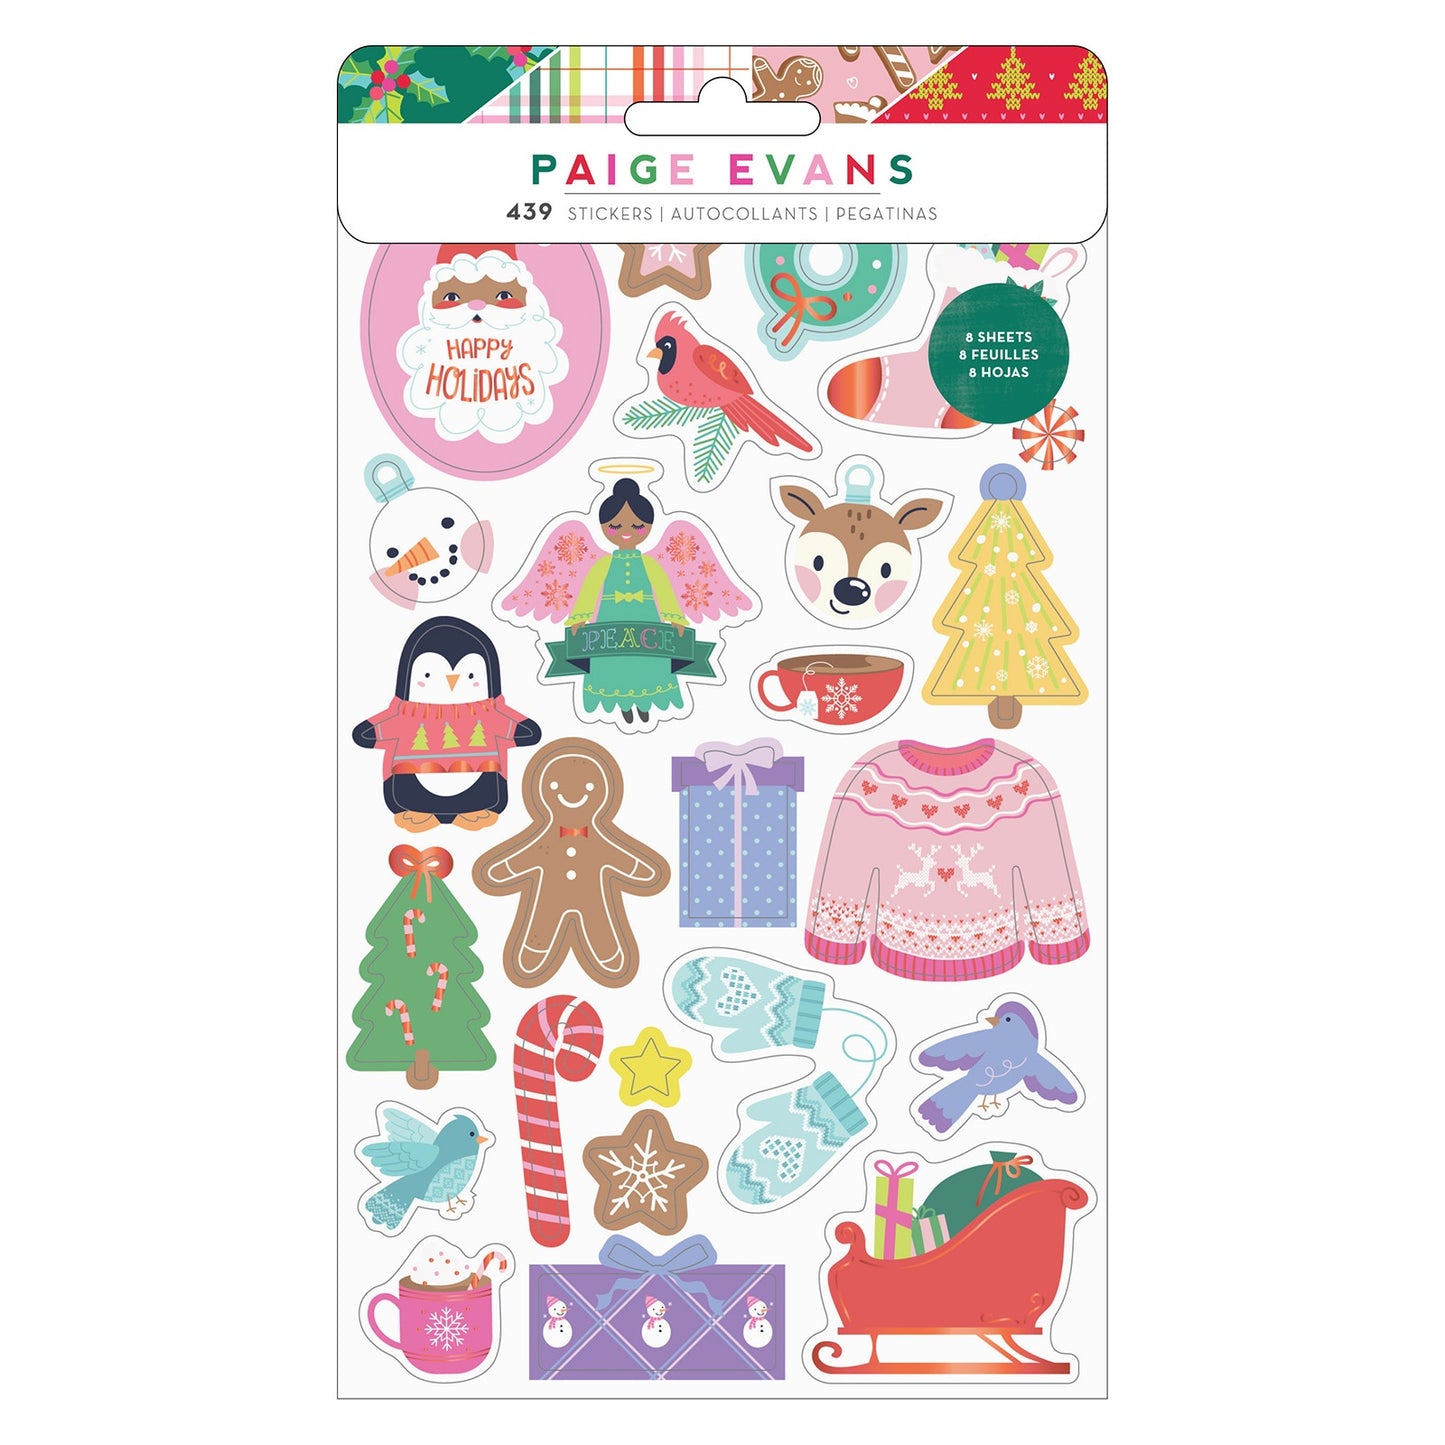 Paige Evans Sugarplum Wishes Sticker Book 8/Sheets-W/Red Foil & Silver Glitter Accents